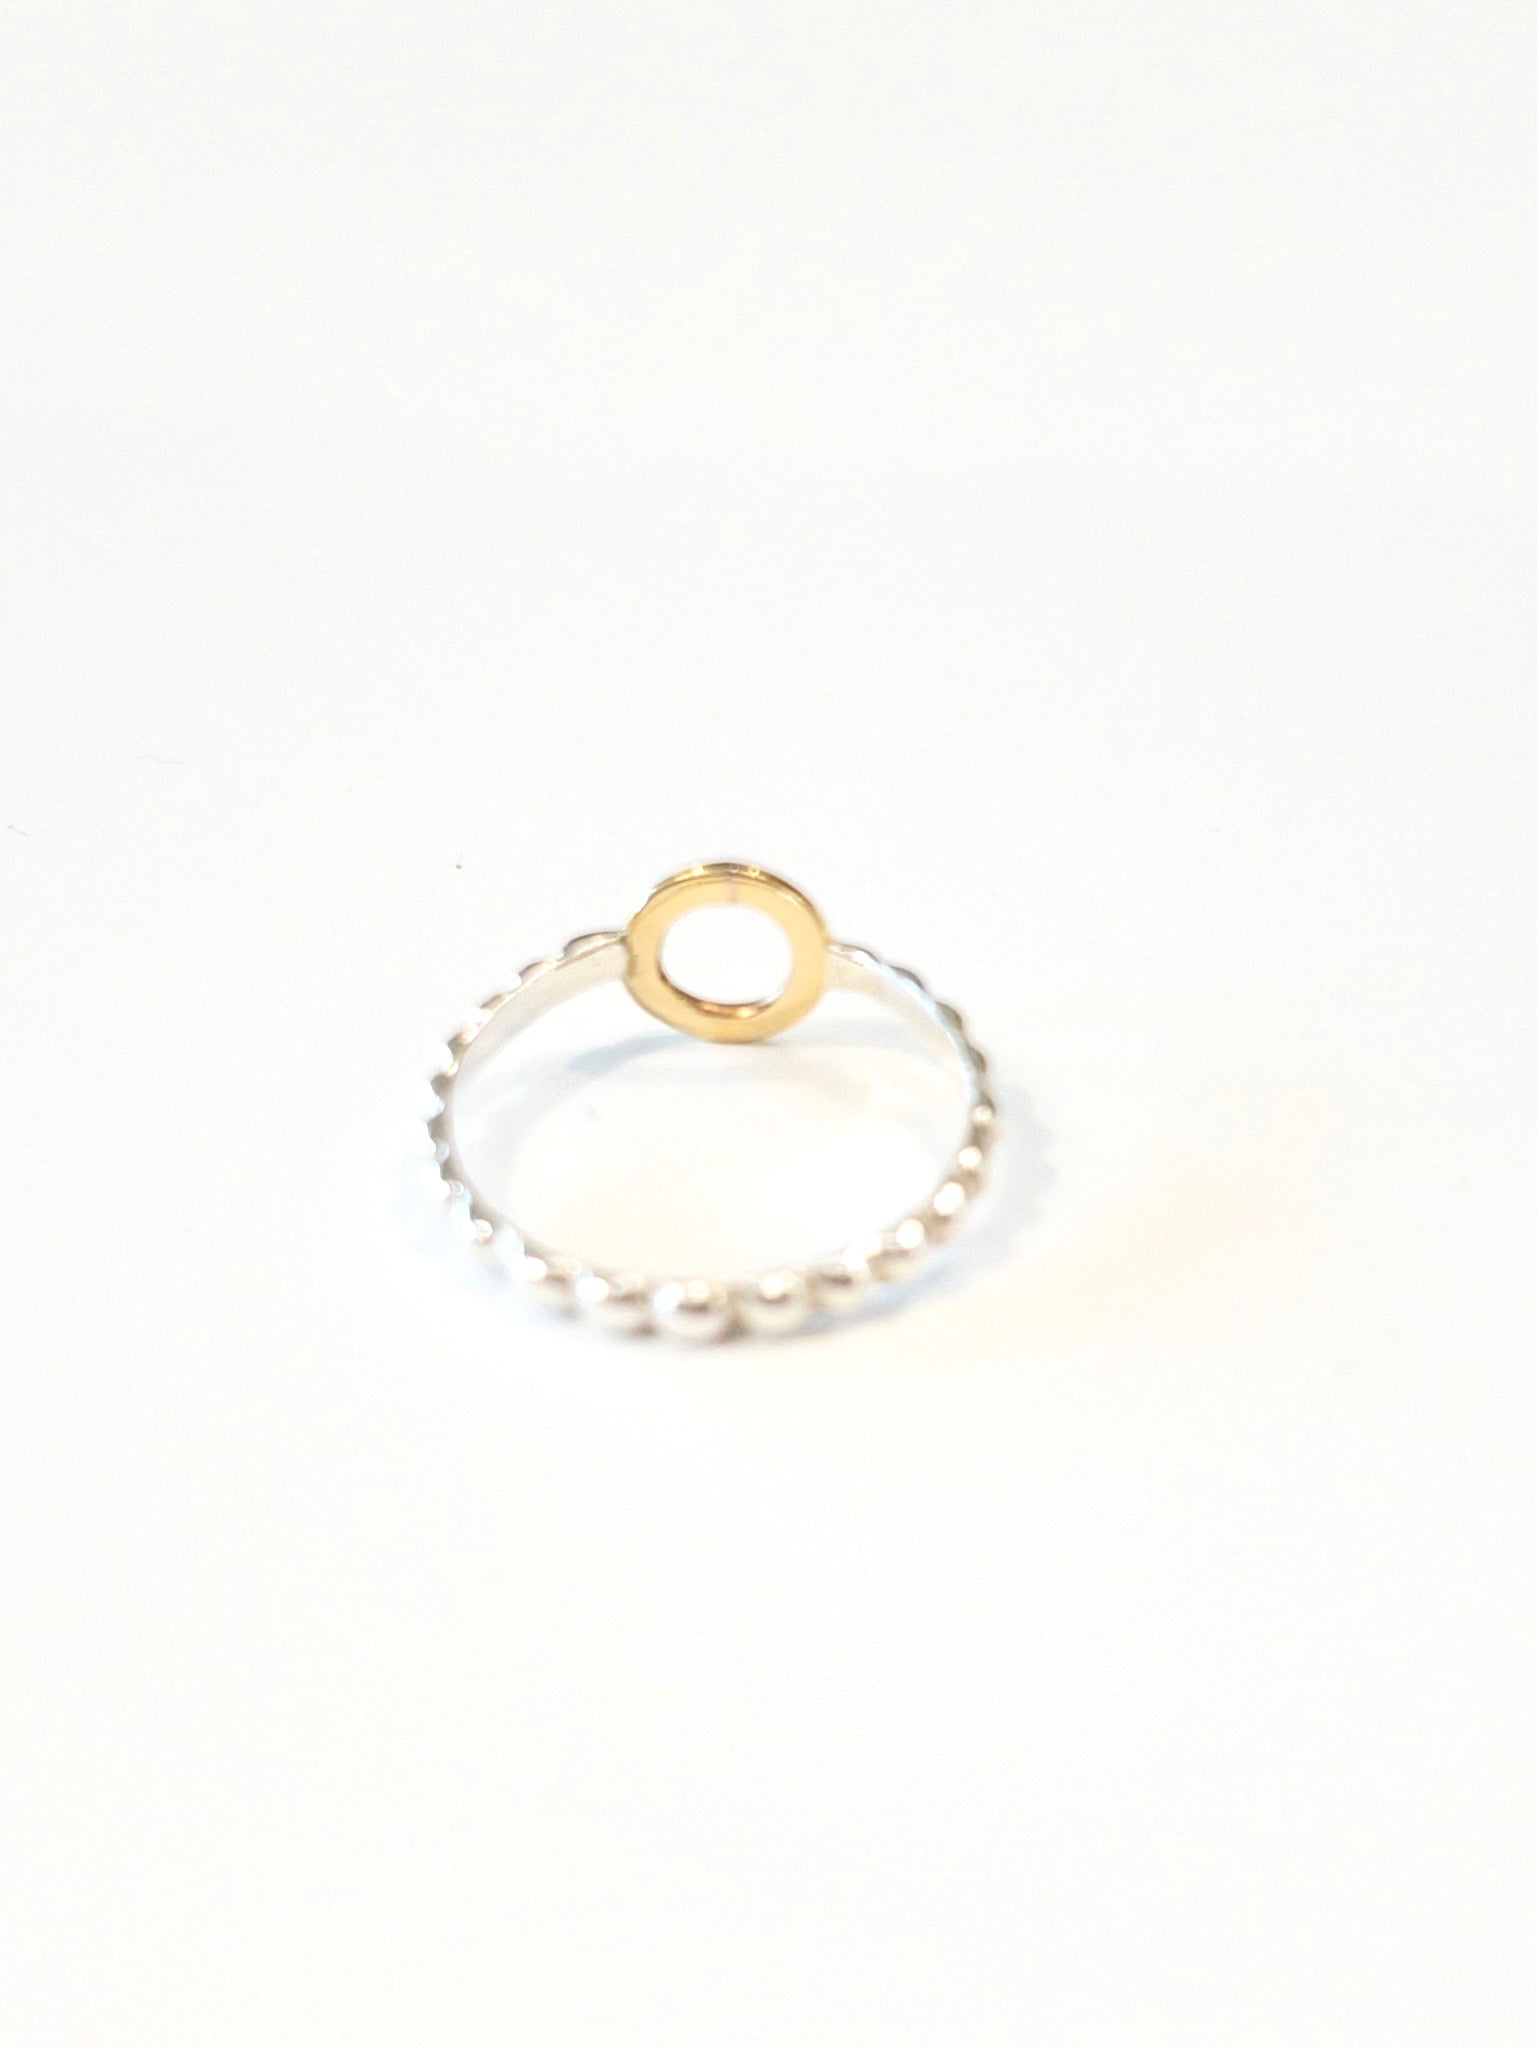 Better Together ring - nh- Gold Circle silver rope band